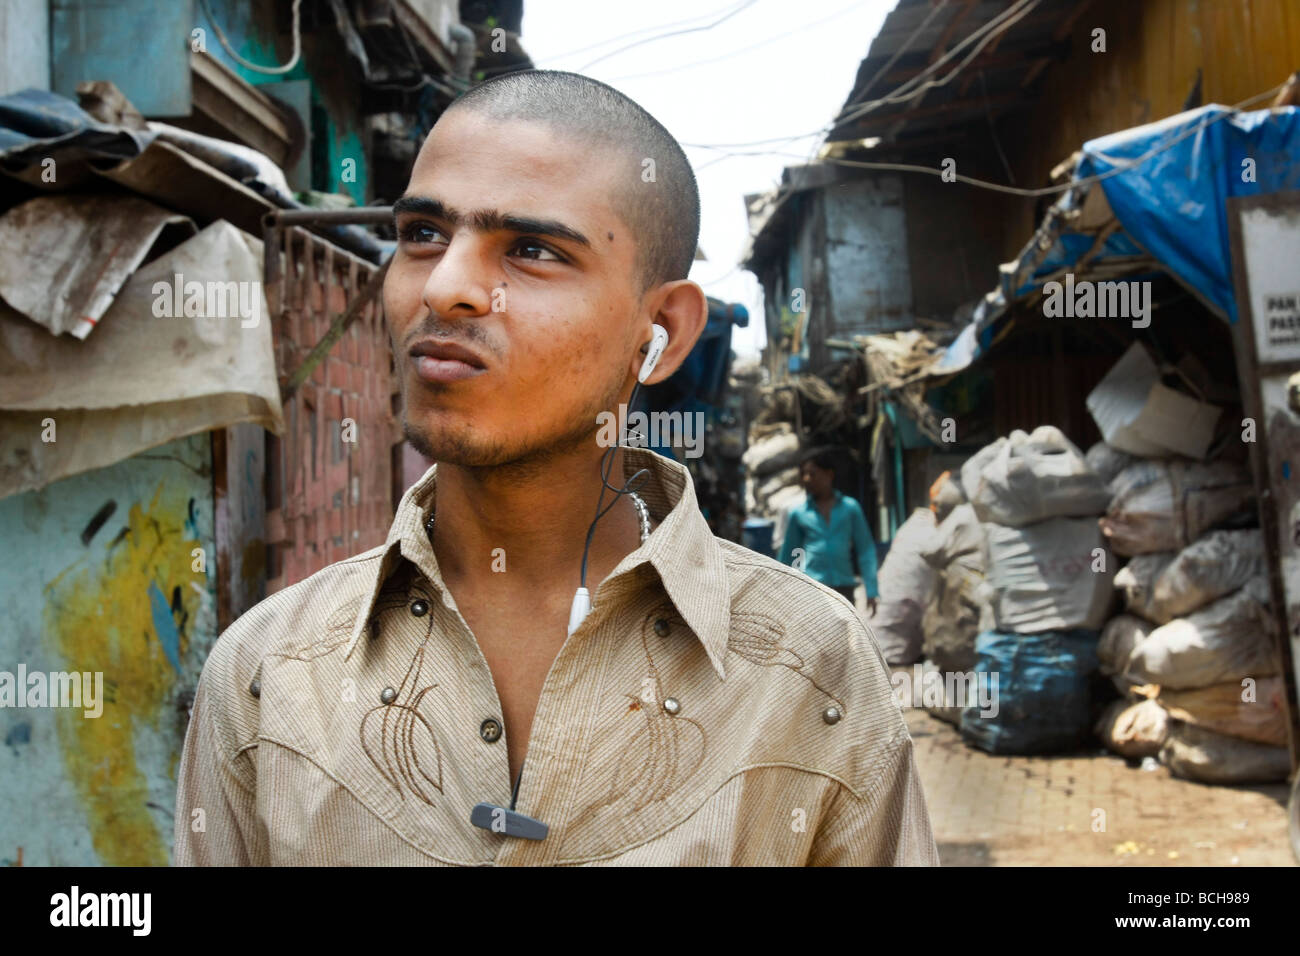 A young man listens to music through earplugs in the poor slum area of Dharavi in Mumbai (Bombay) in India. Stock Photo